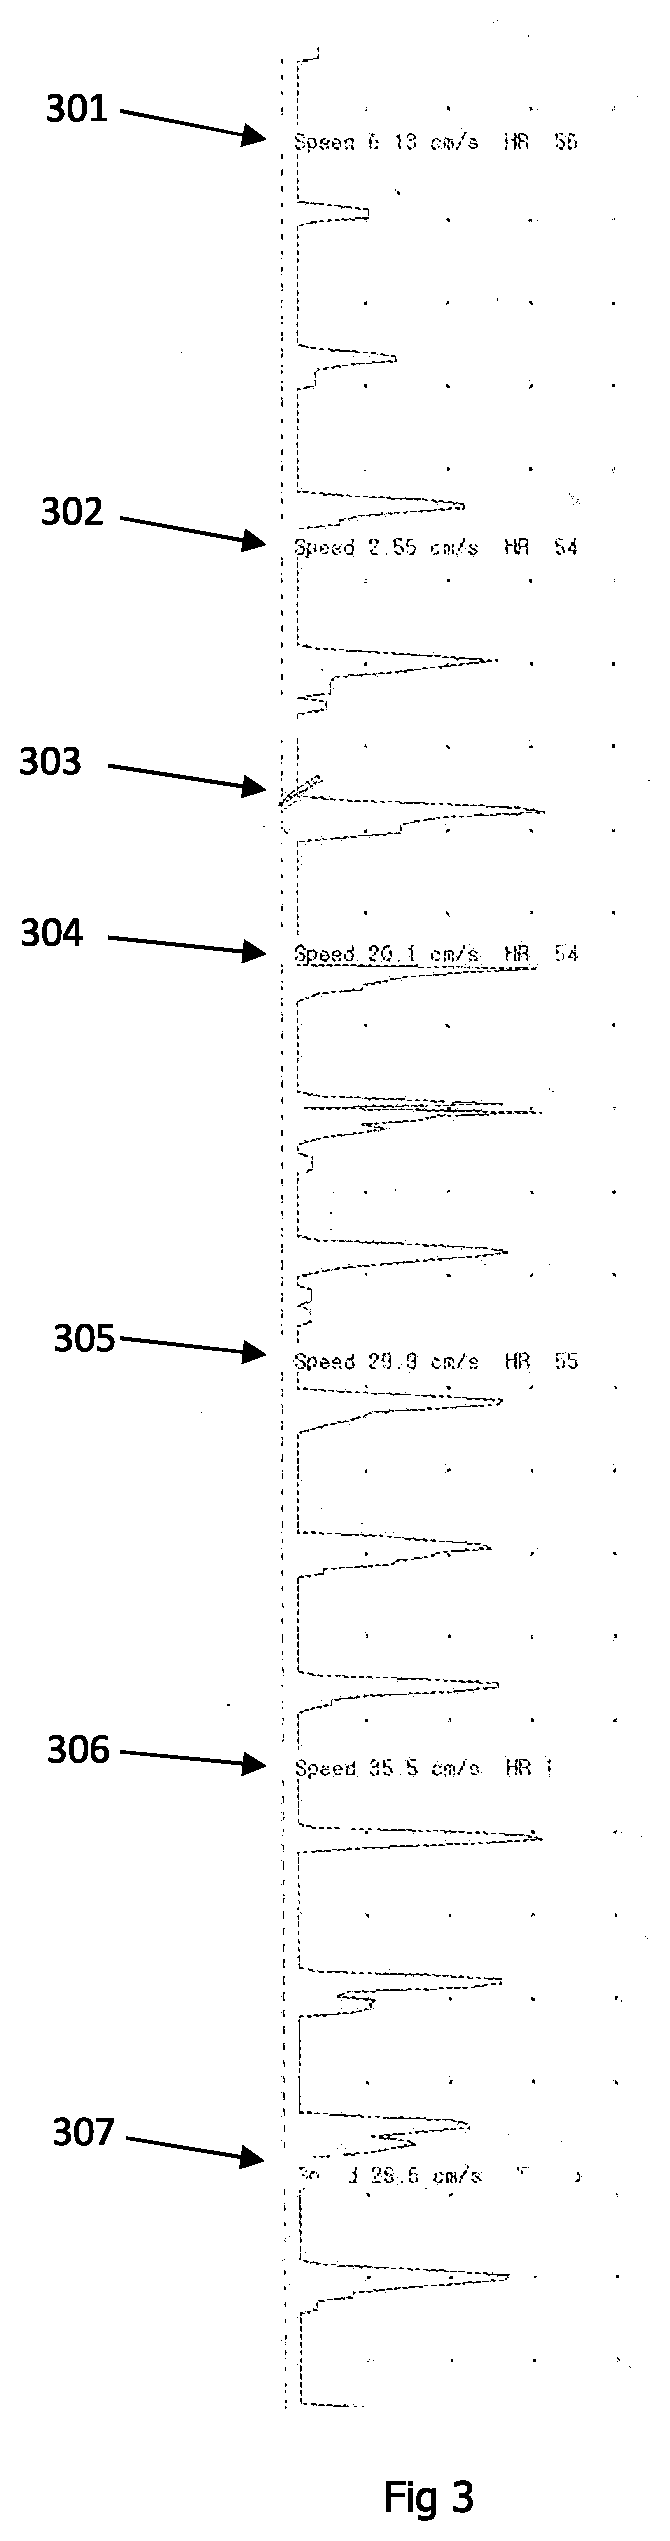 Method and apparatus for improvement of microcirculation